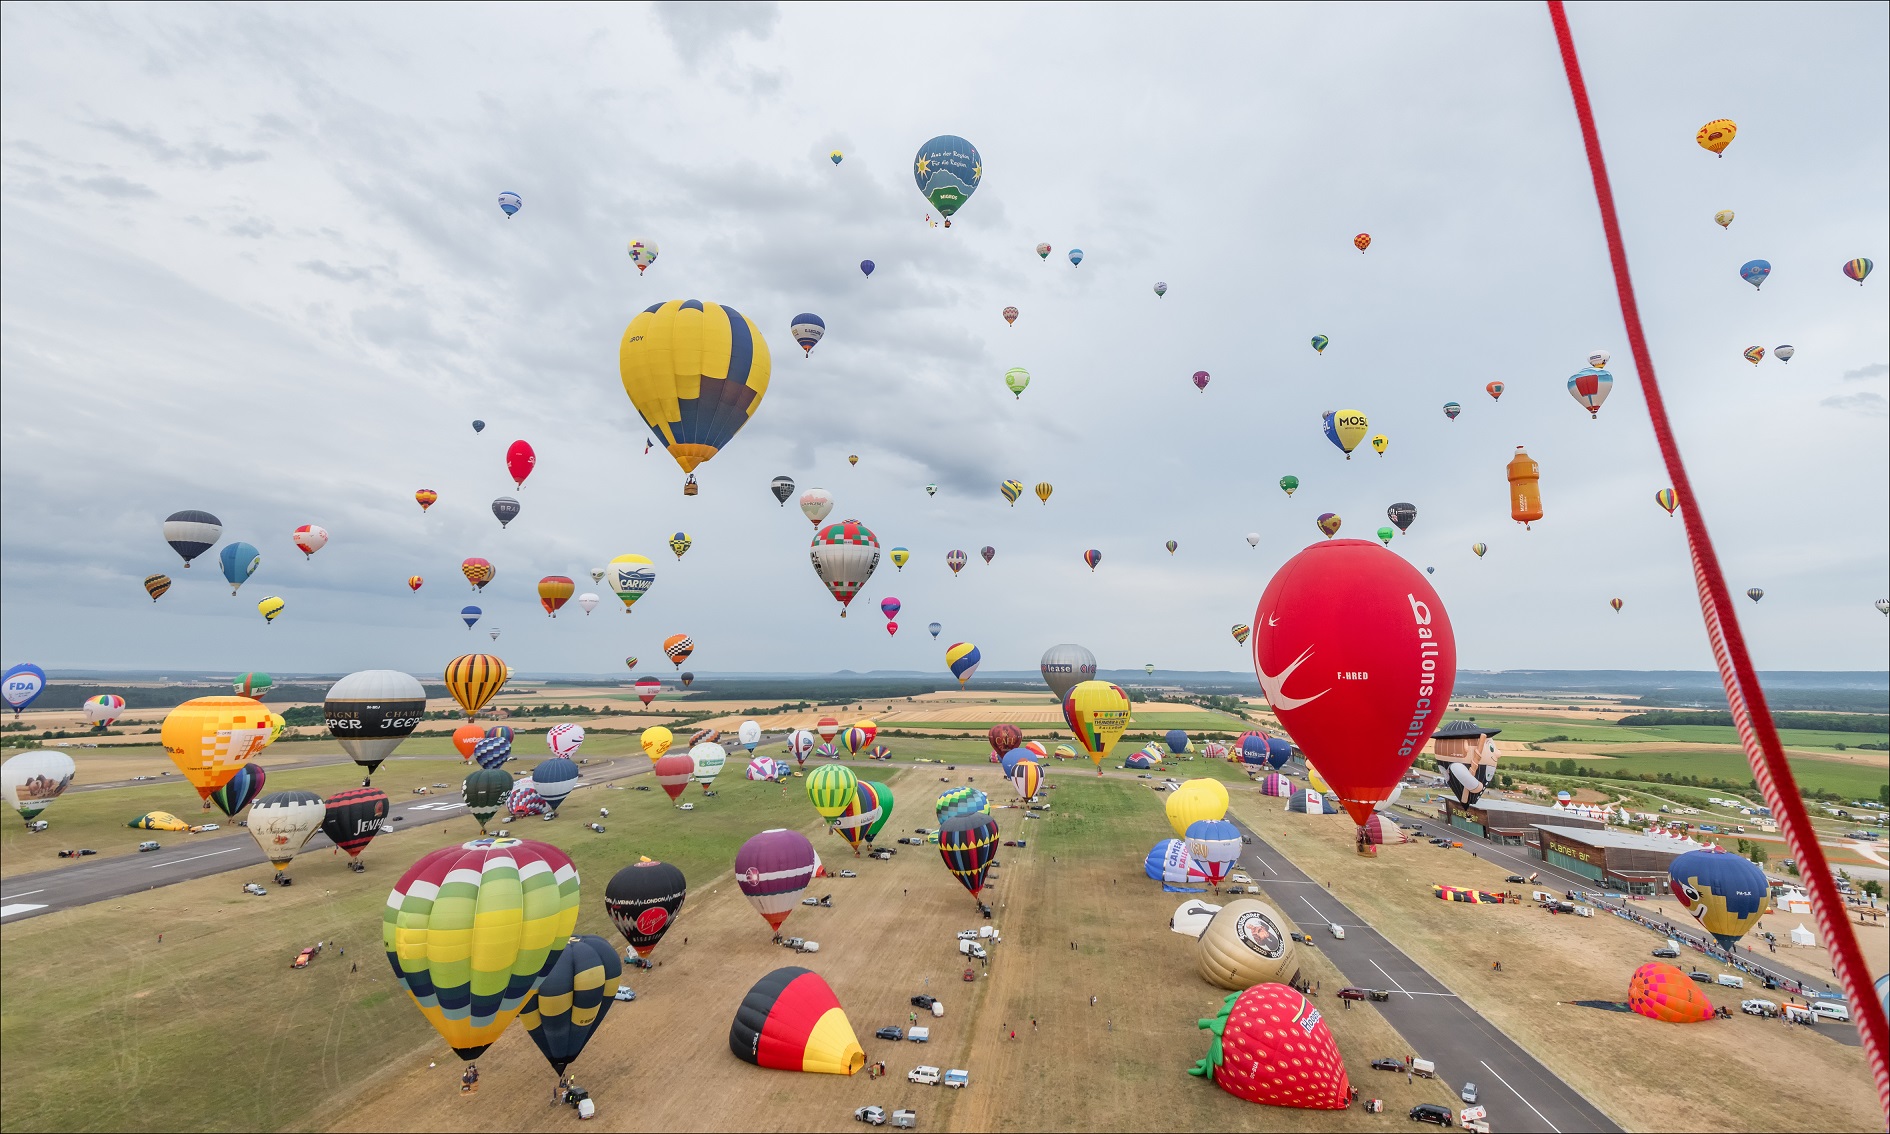 Flying for the first time at Grand Est Mondial Air Ballons